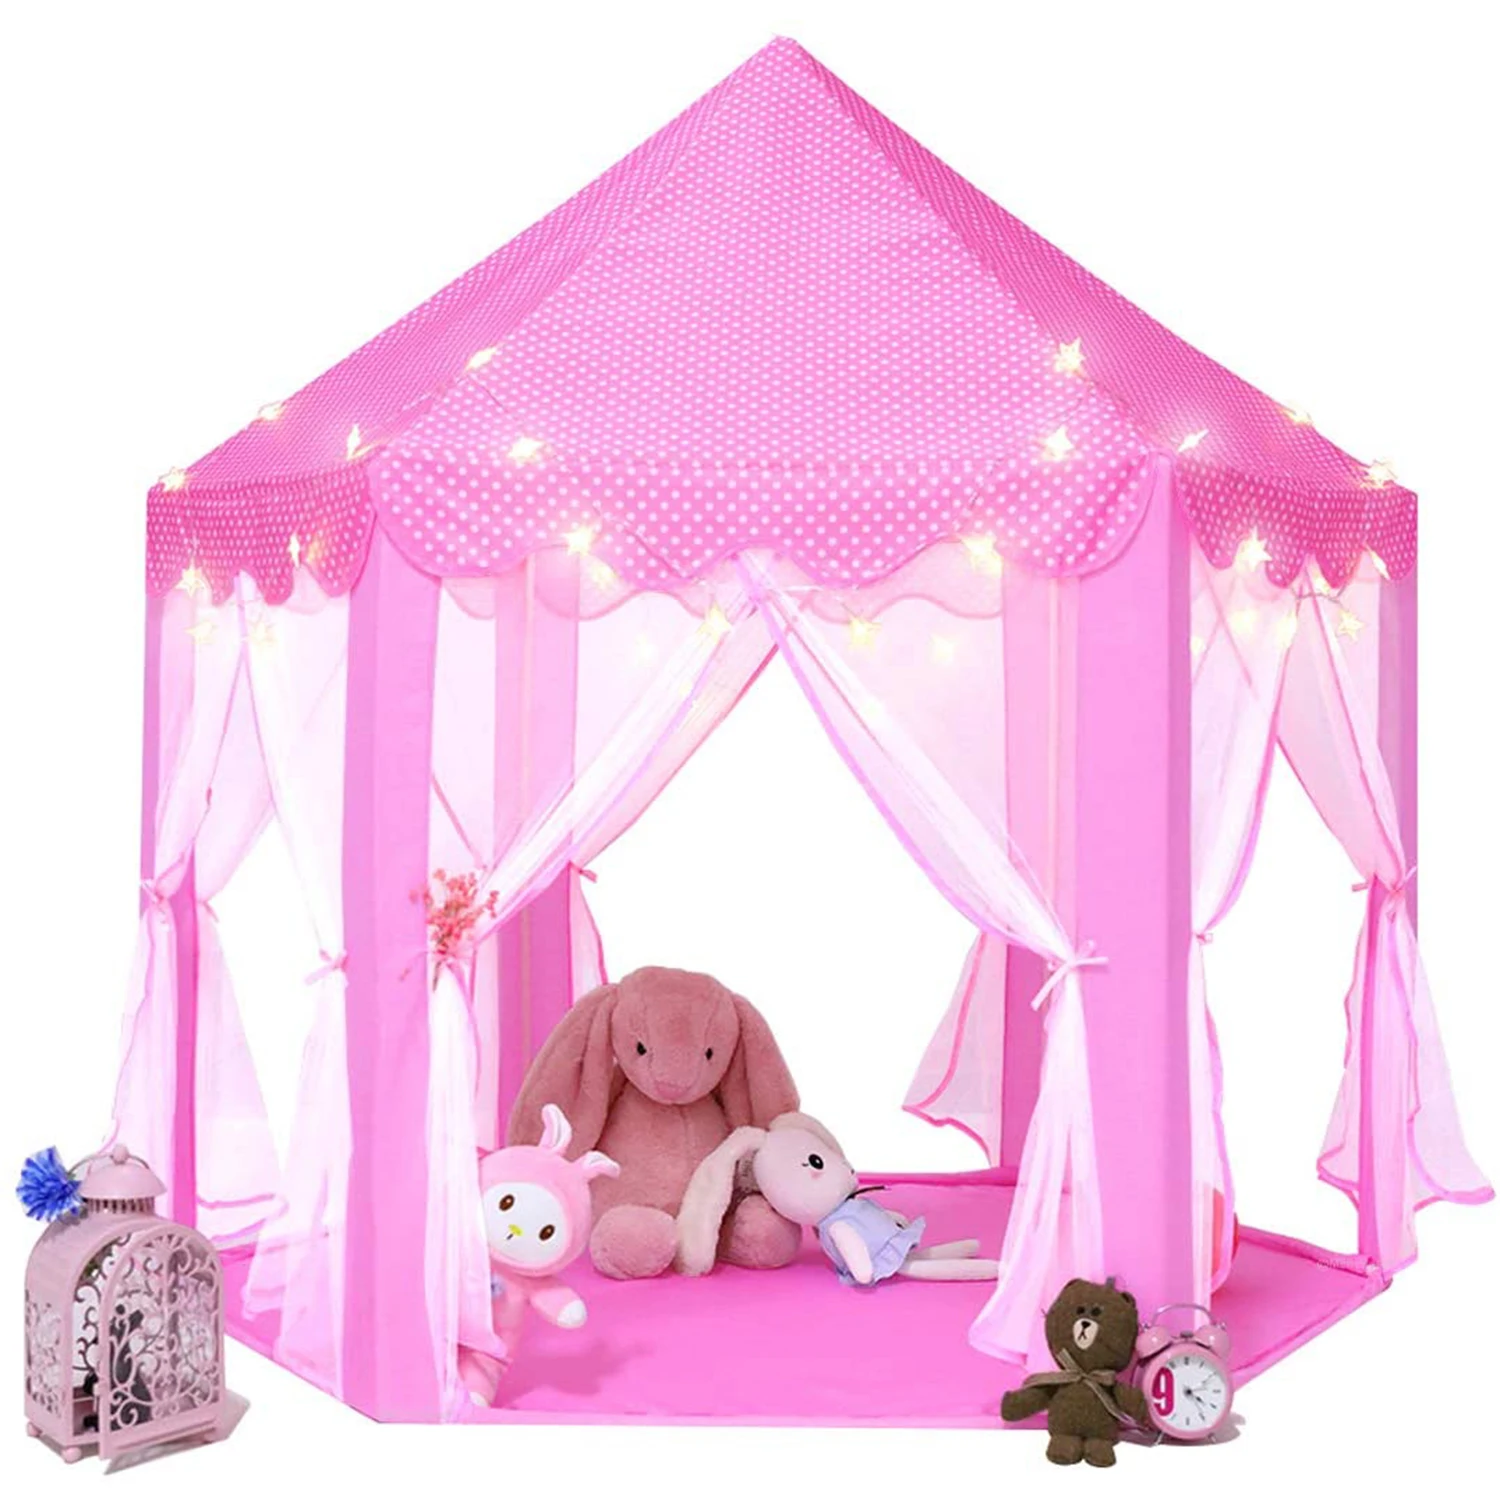 

Princess Tent Girls Large Playhouse Kids Castle Play Tent with Star Lights for Children Indoor and Outdoor Games Toy Tents